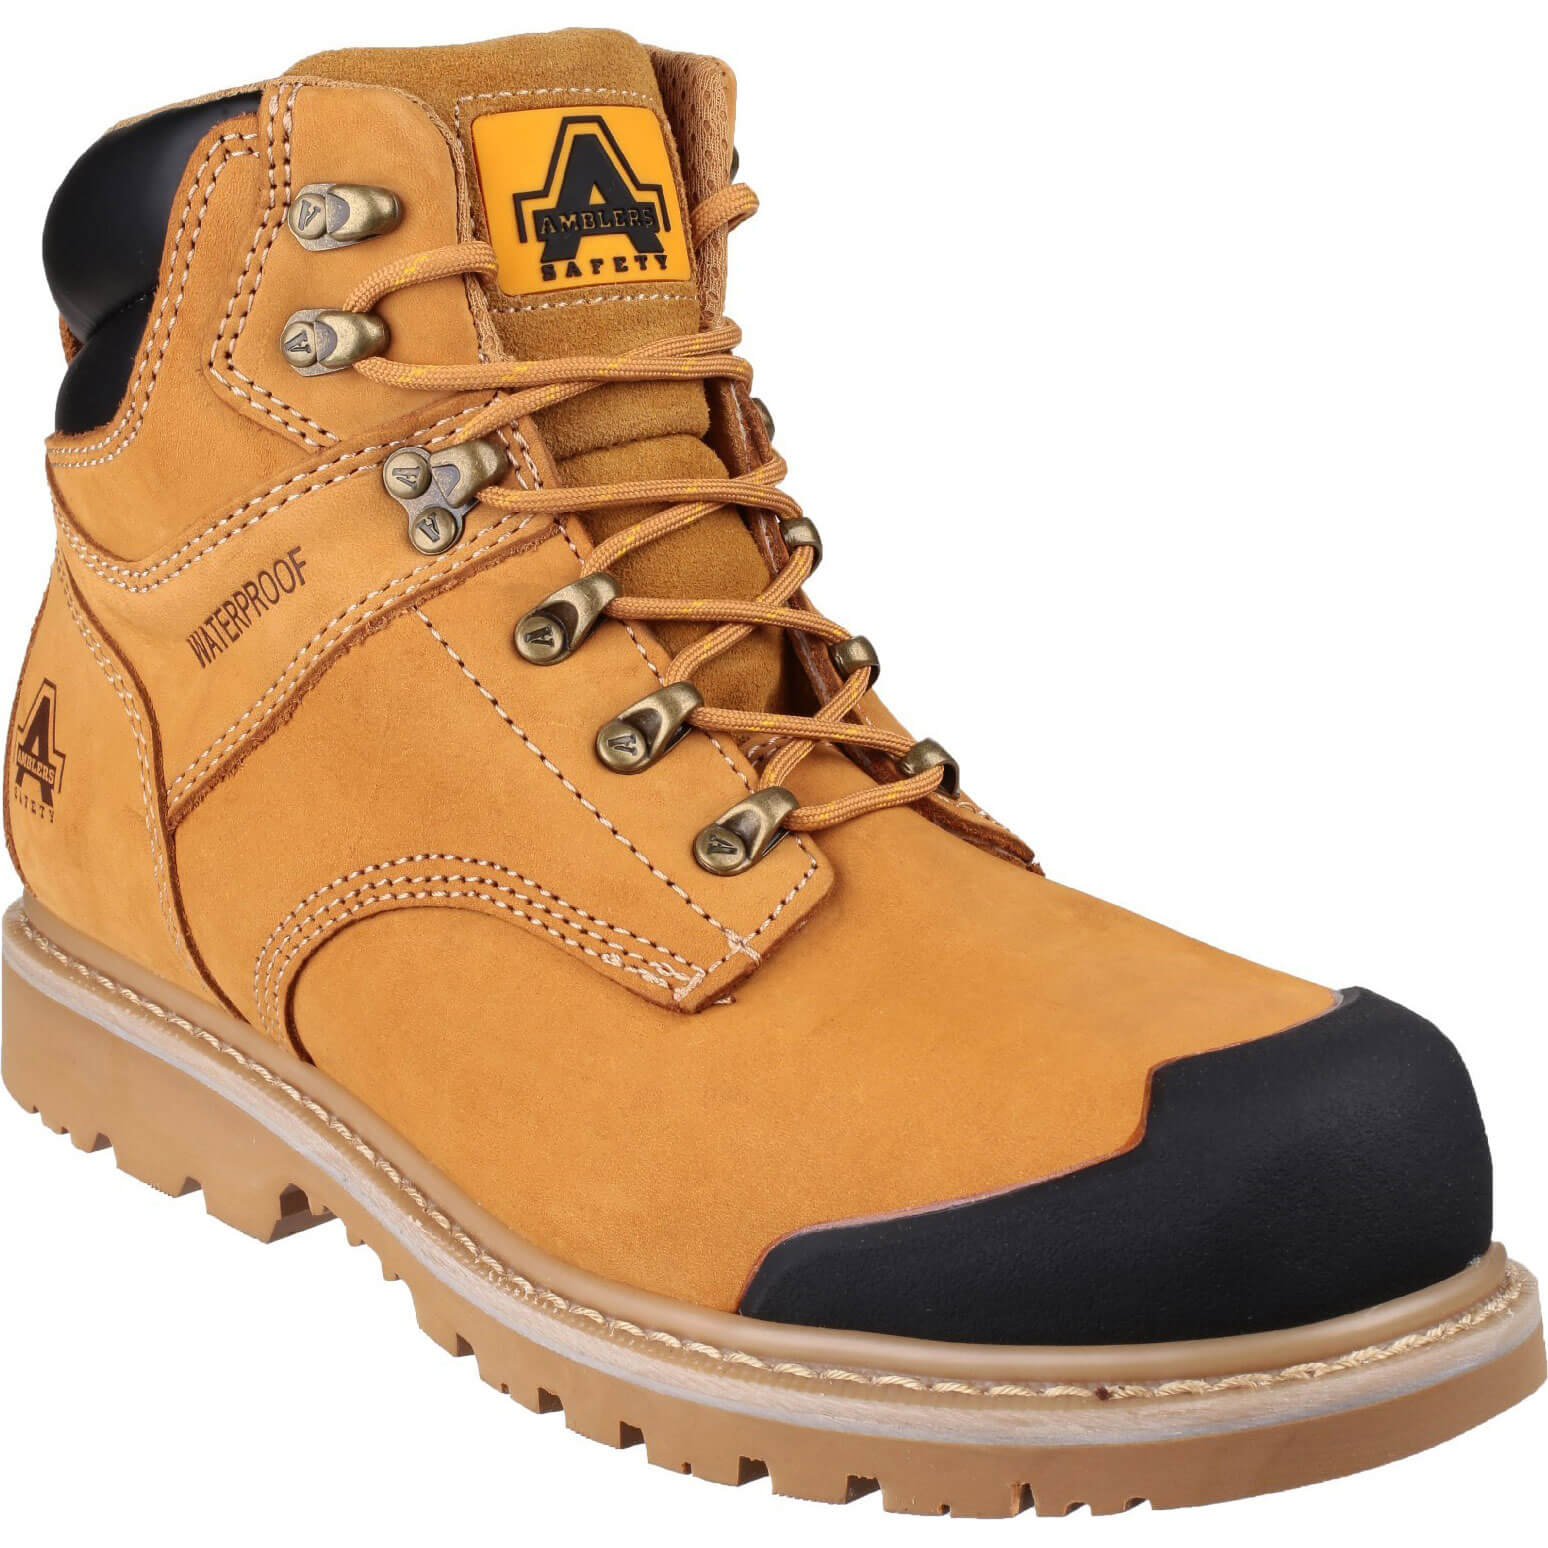 Photo of Amblers Mens Safety Fs226 Goodyear Welted Waterproof Industrial Safety Boots Honey Size 10